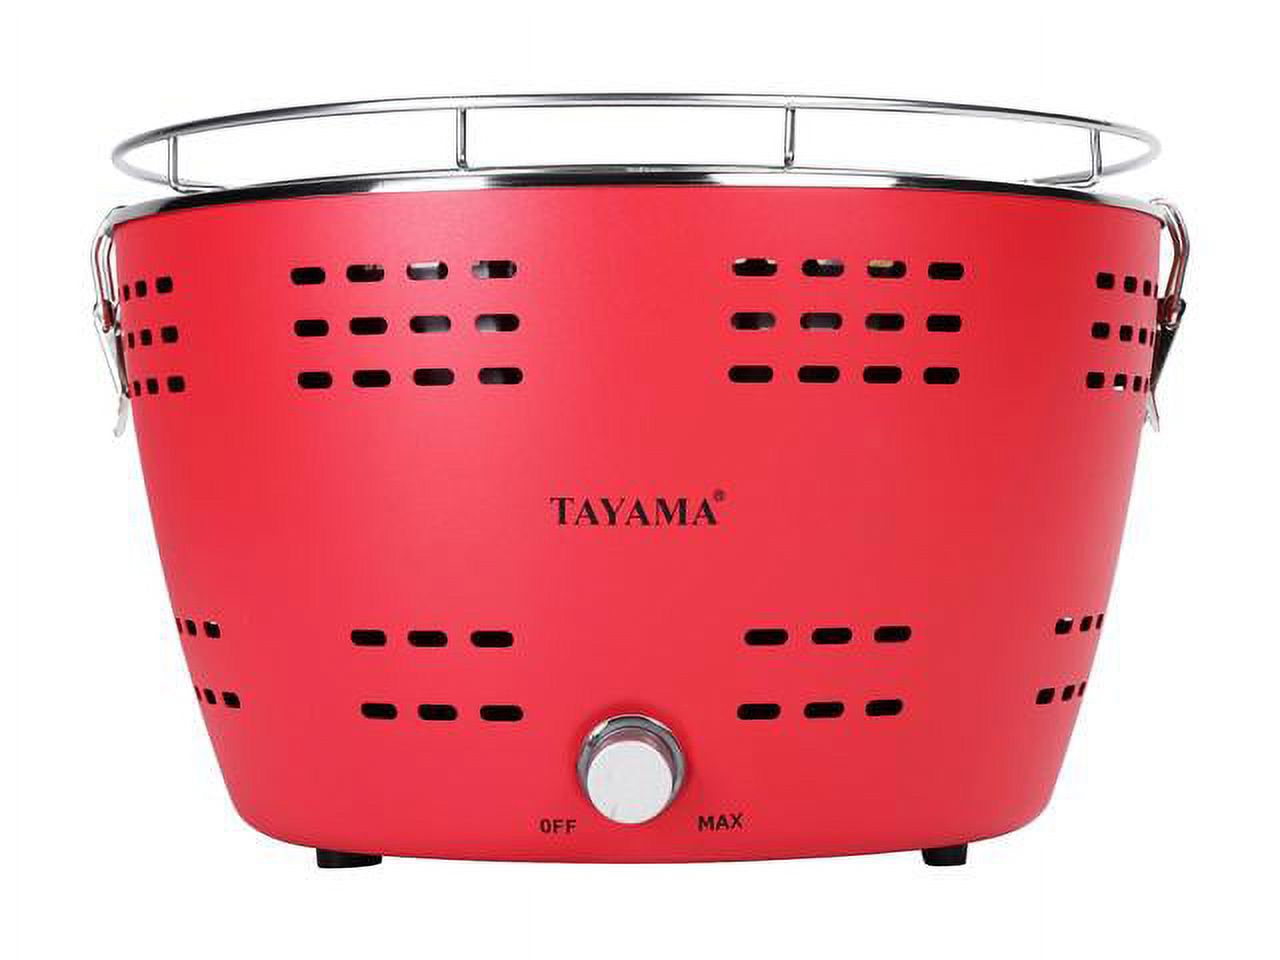 Tayama Portable Charcoal Grill in Red - image 3 of 8